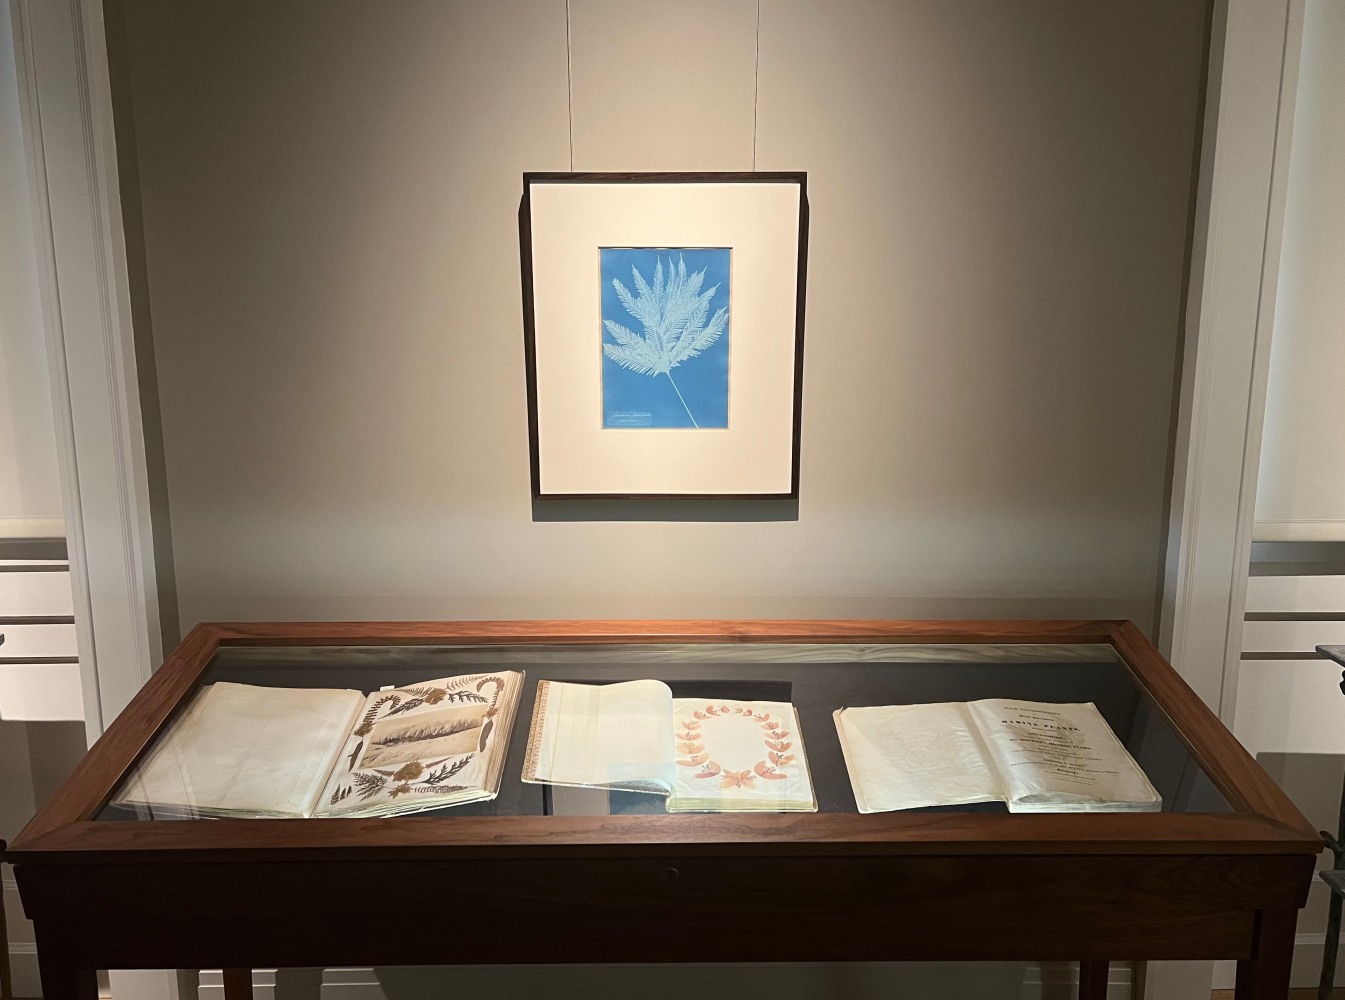 Fourth installation view of exhibition, Anna Atkins cyanotype of fern frond and display case with 3 books of botanical specimens